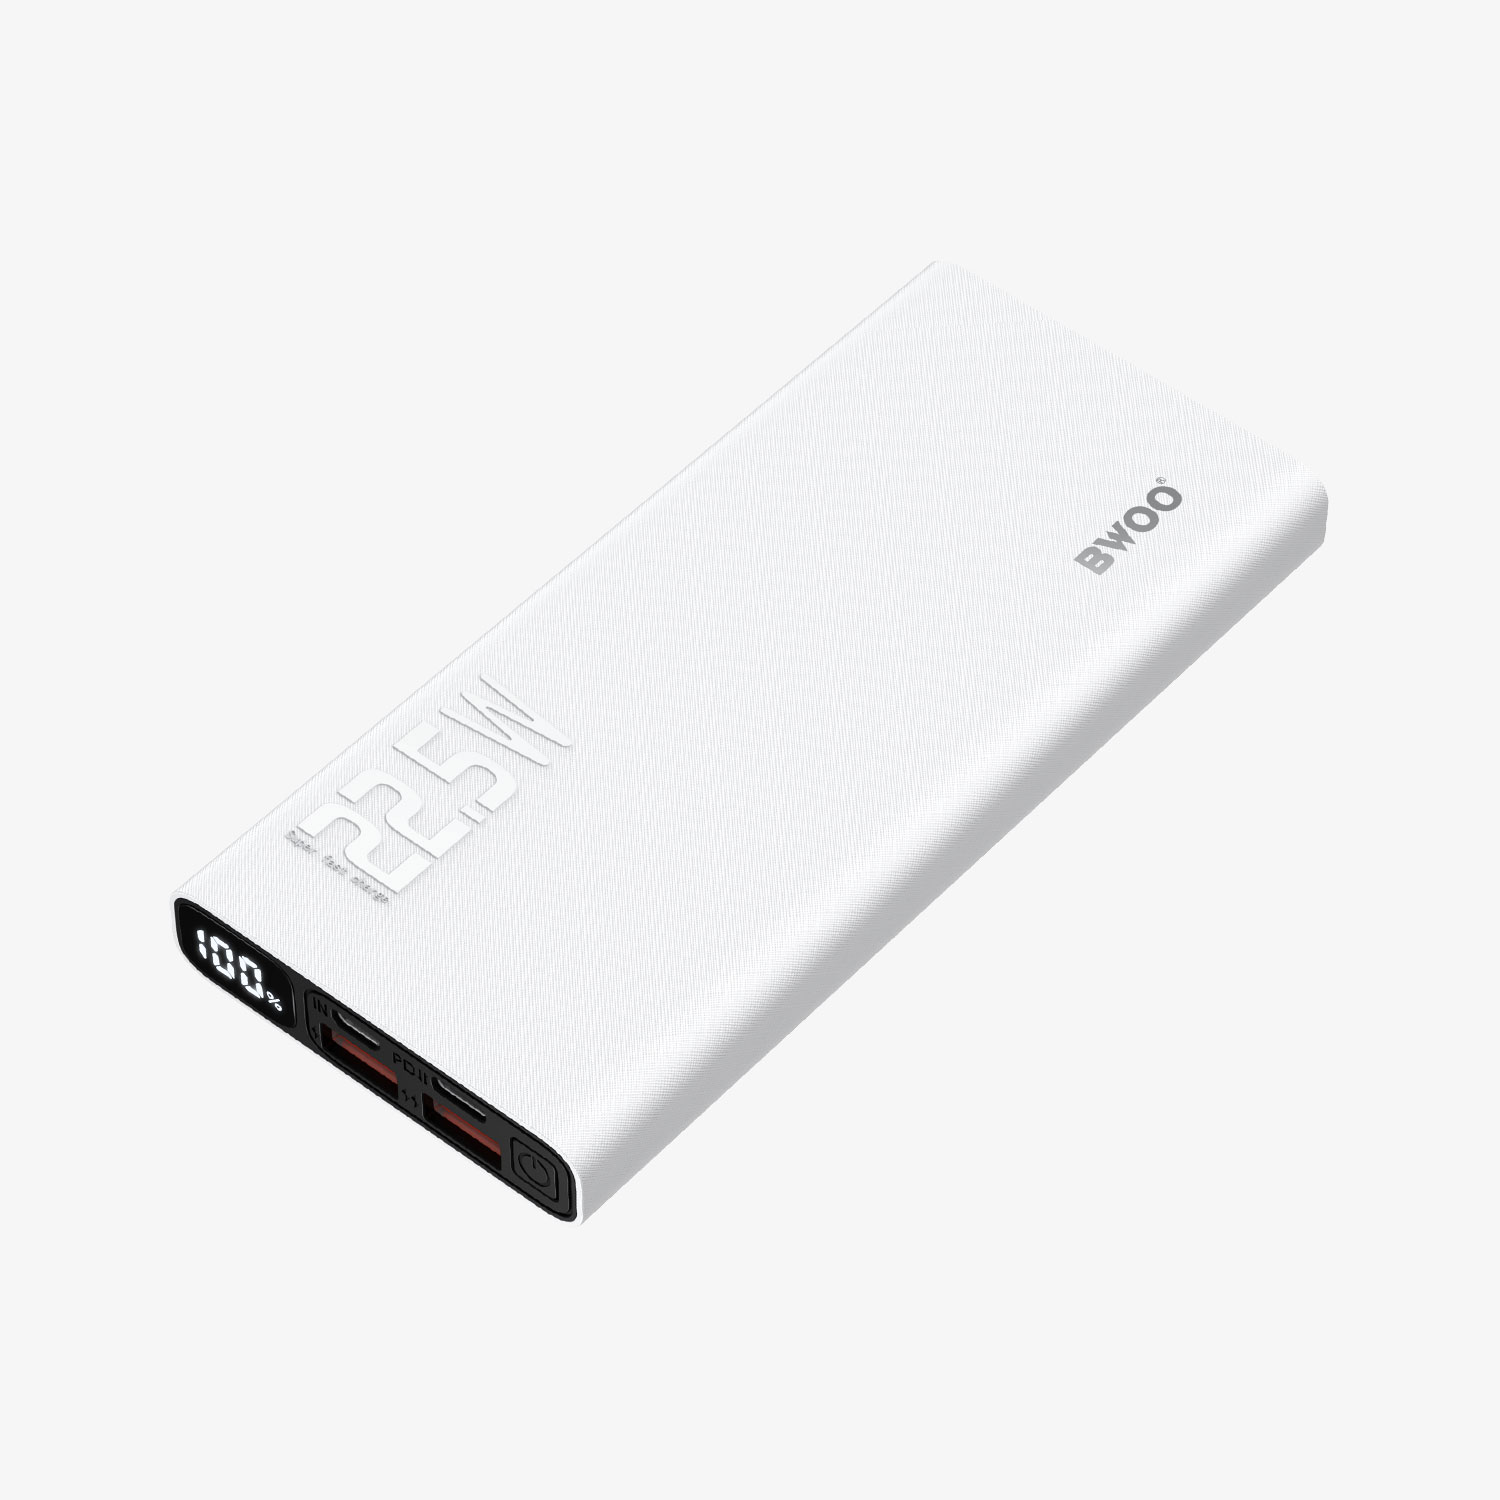 22.5W fast charging power bank